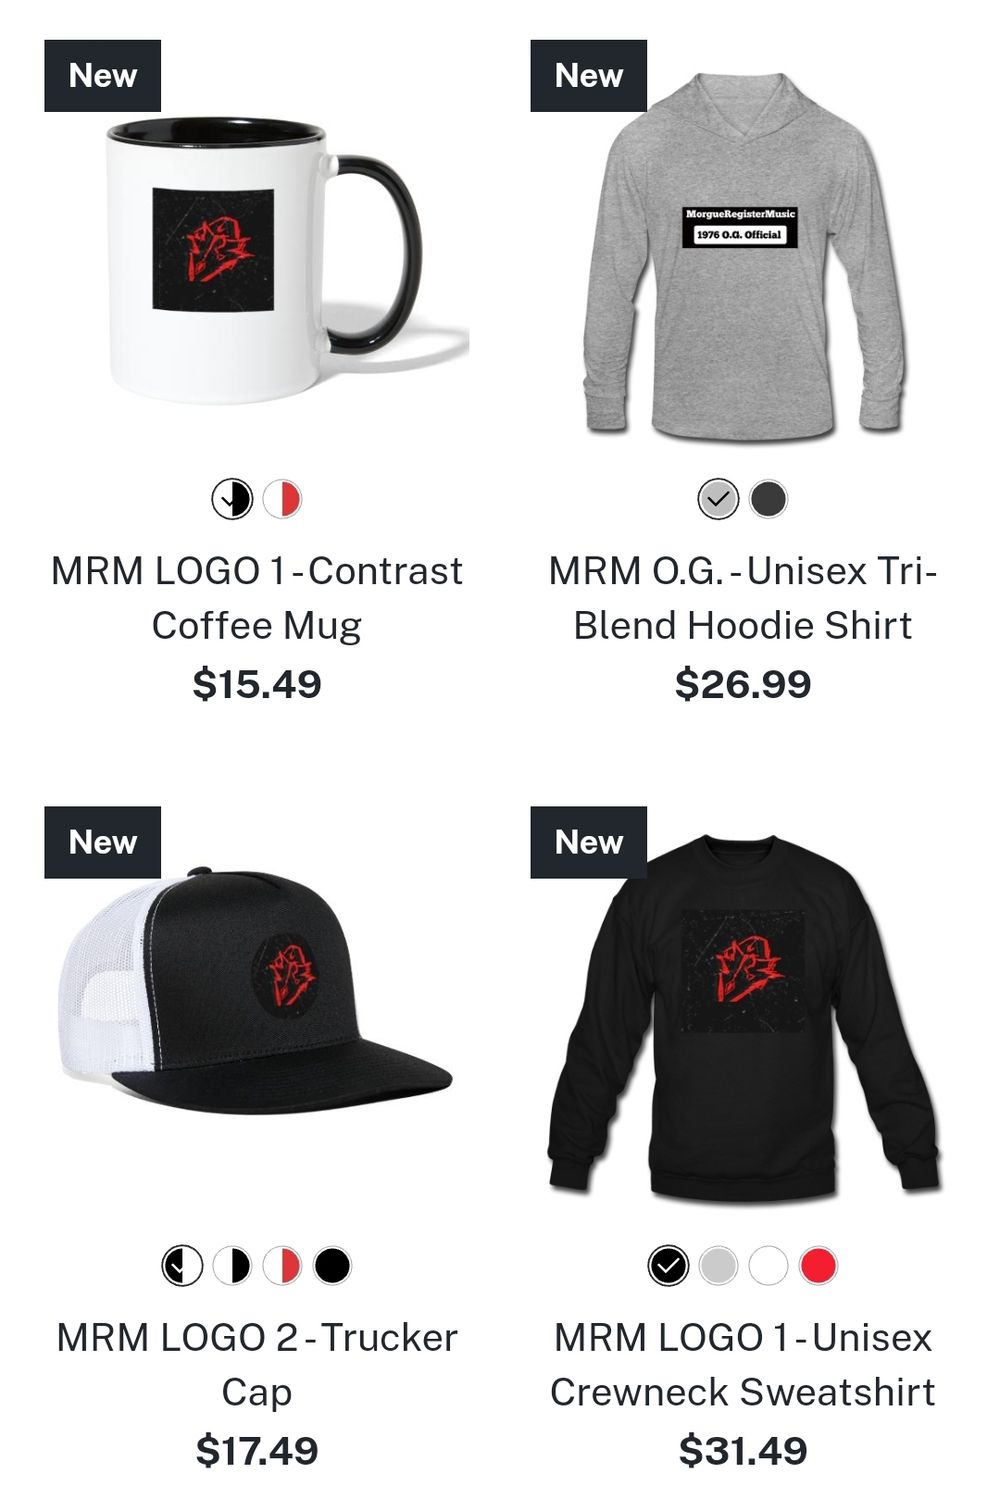 Many other items available at merch store